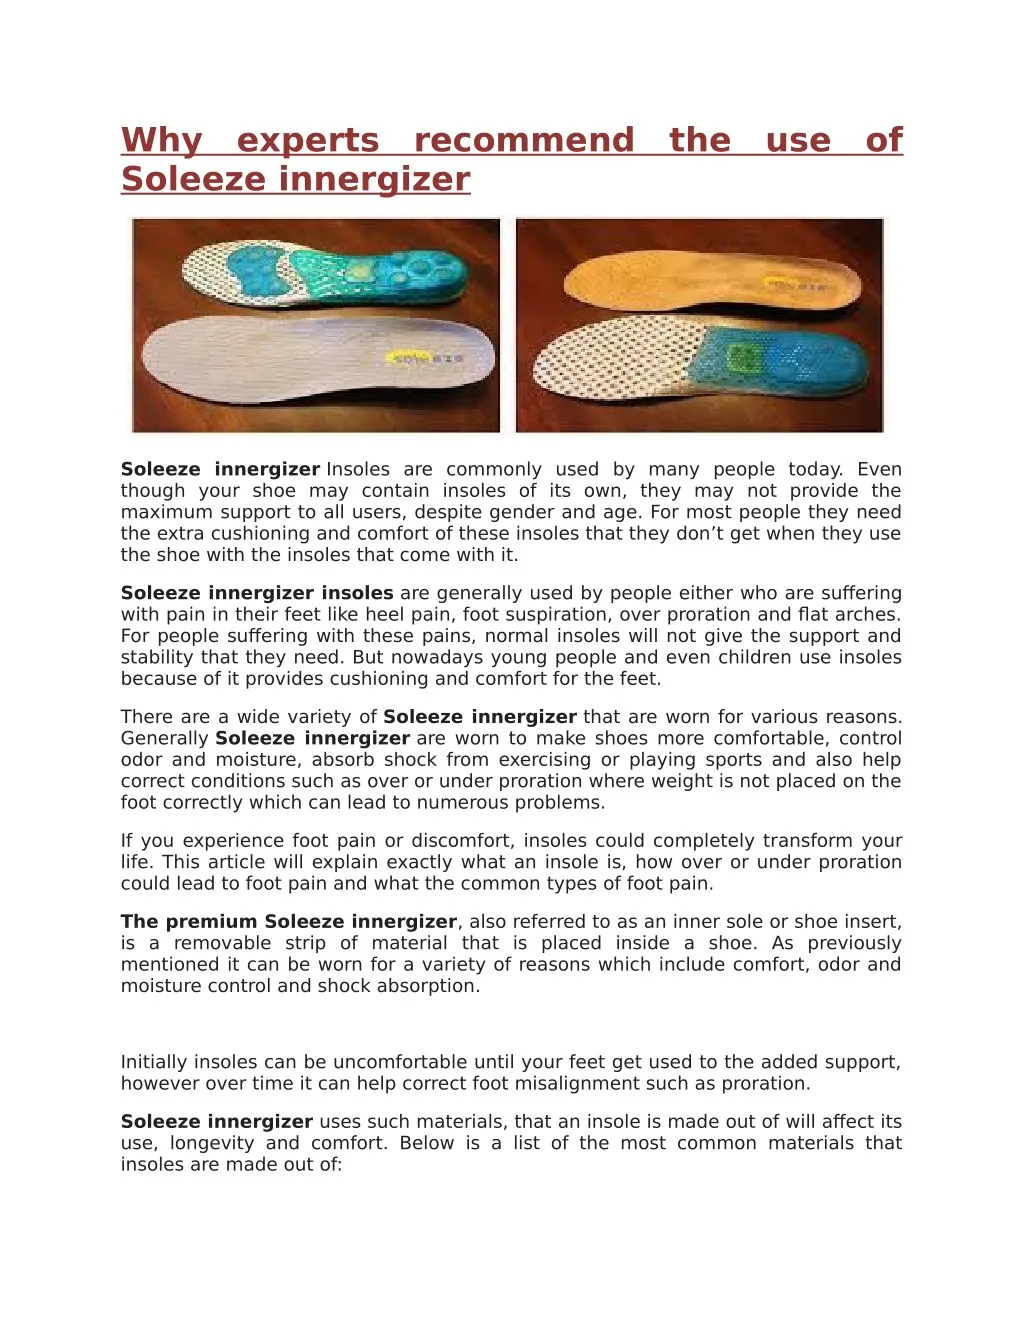 why experts recommend the use of soleeze